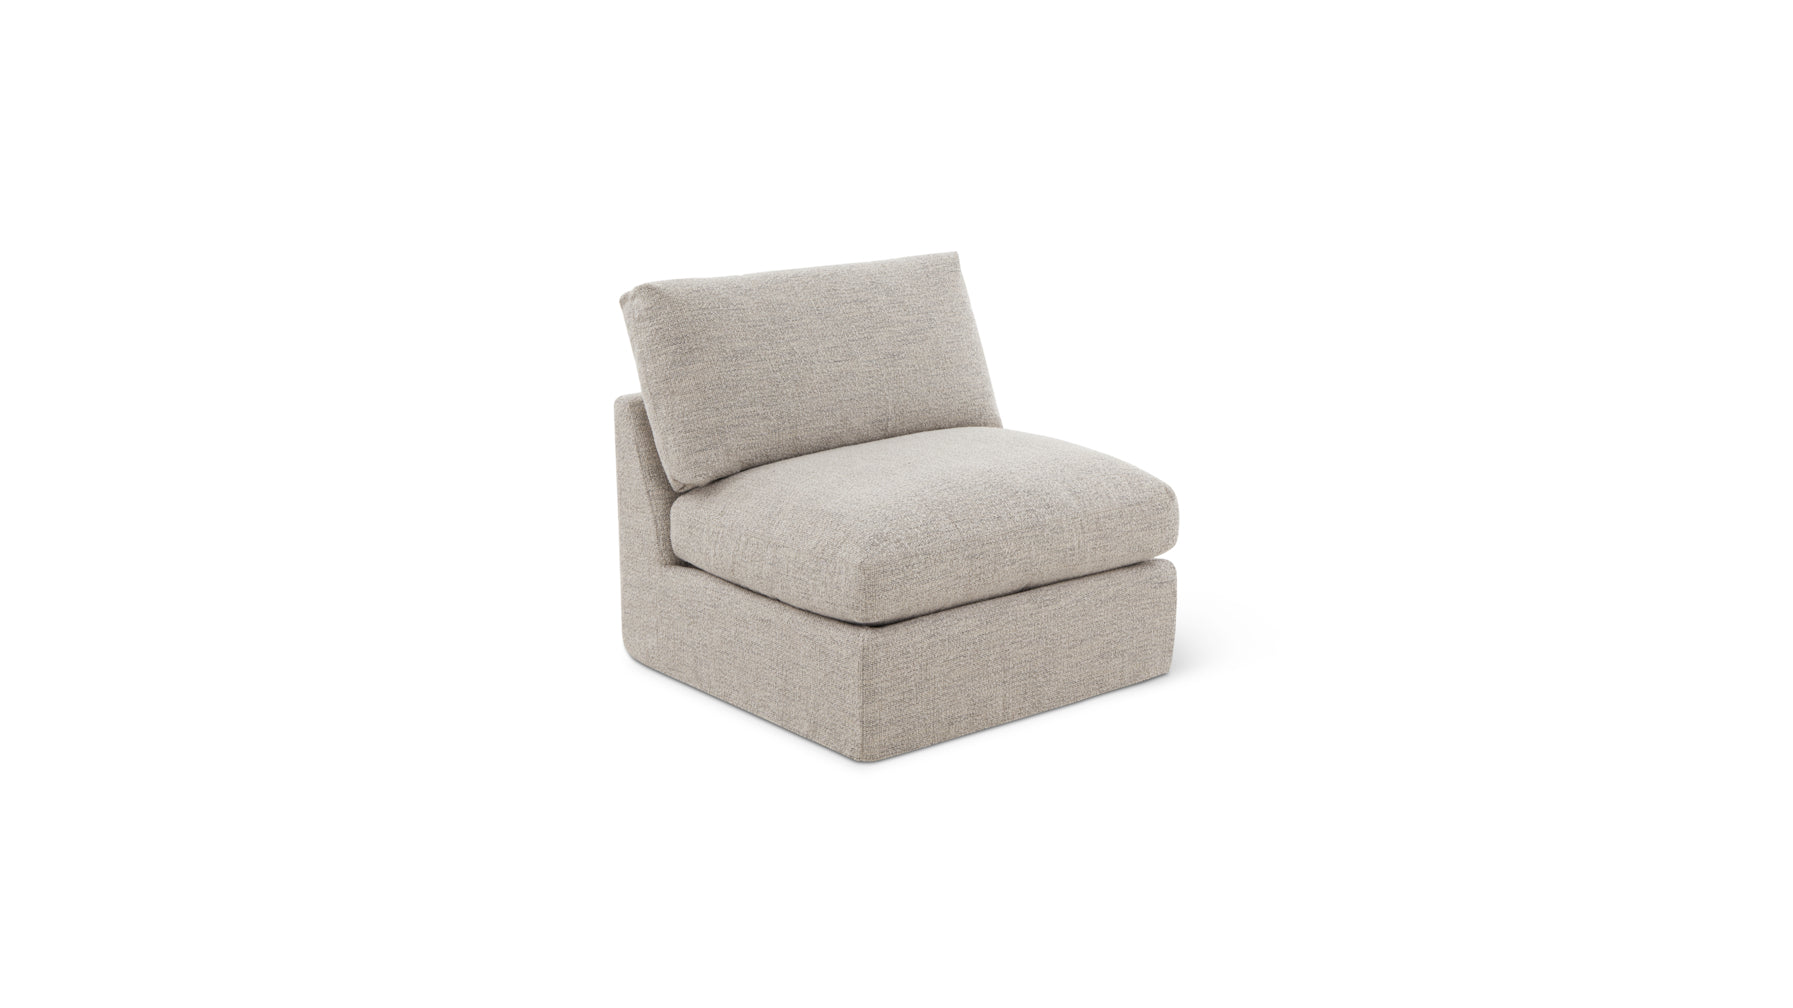 Get Together™ Armless Chair, Standard, Oatmeal - Image 4